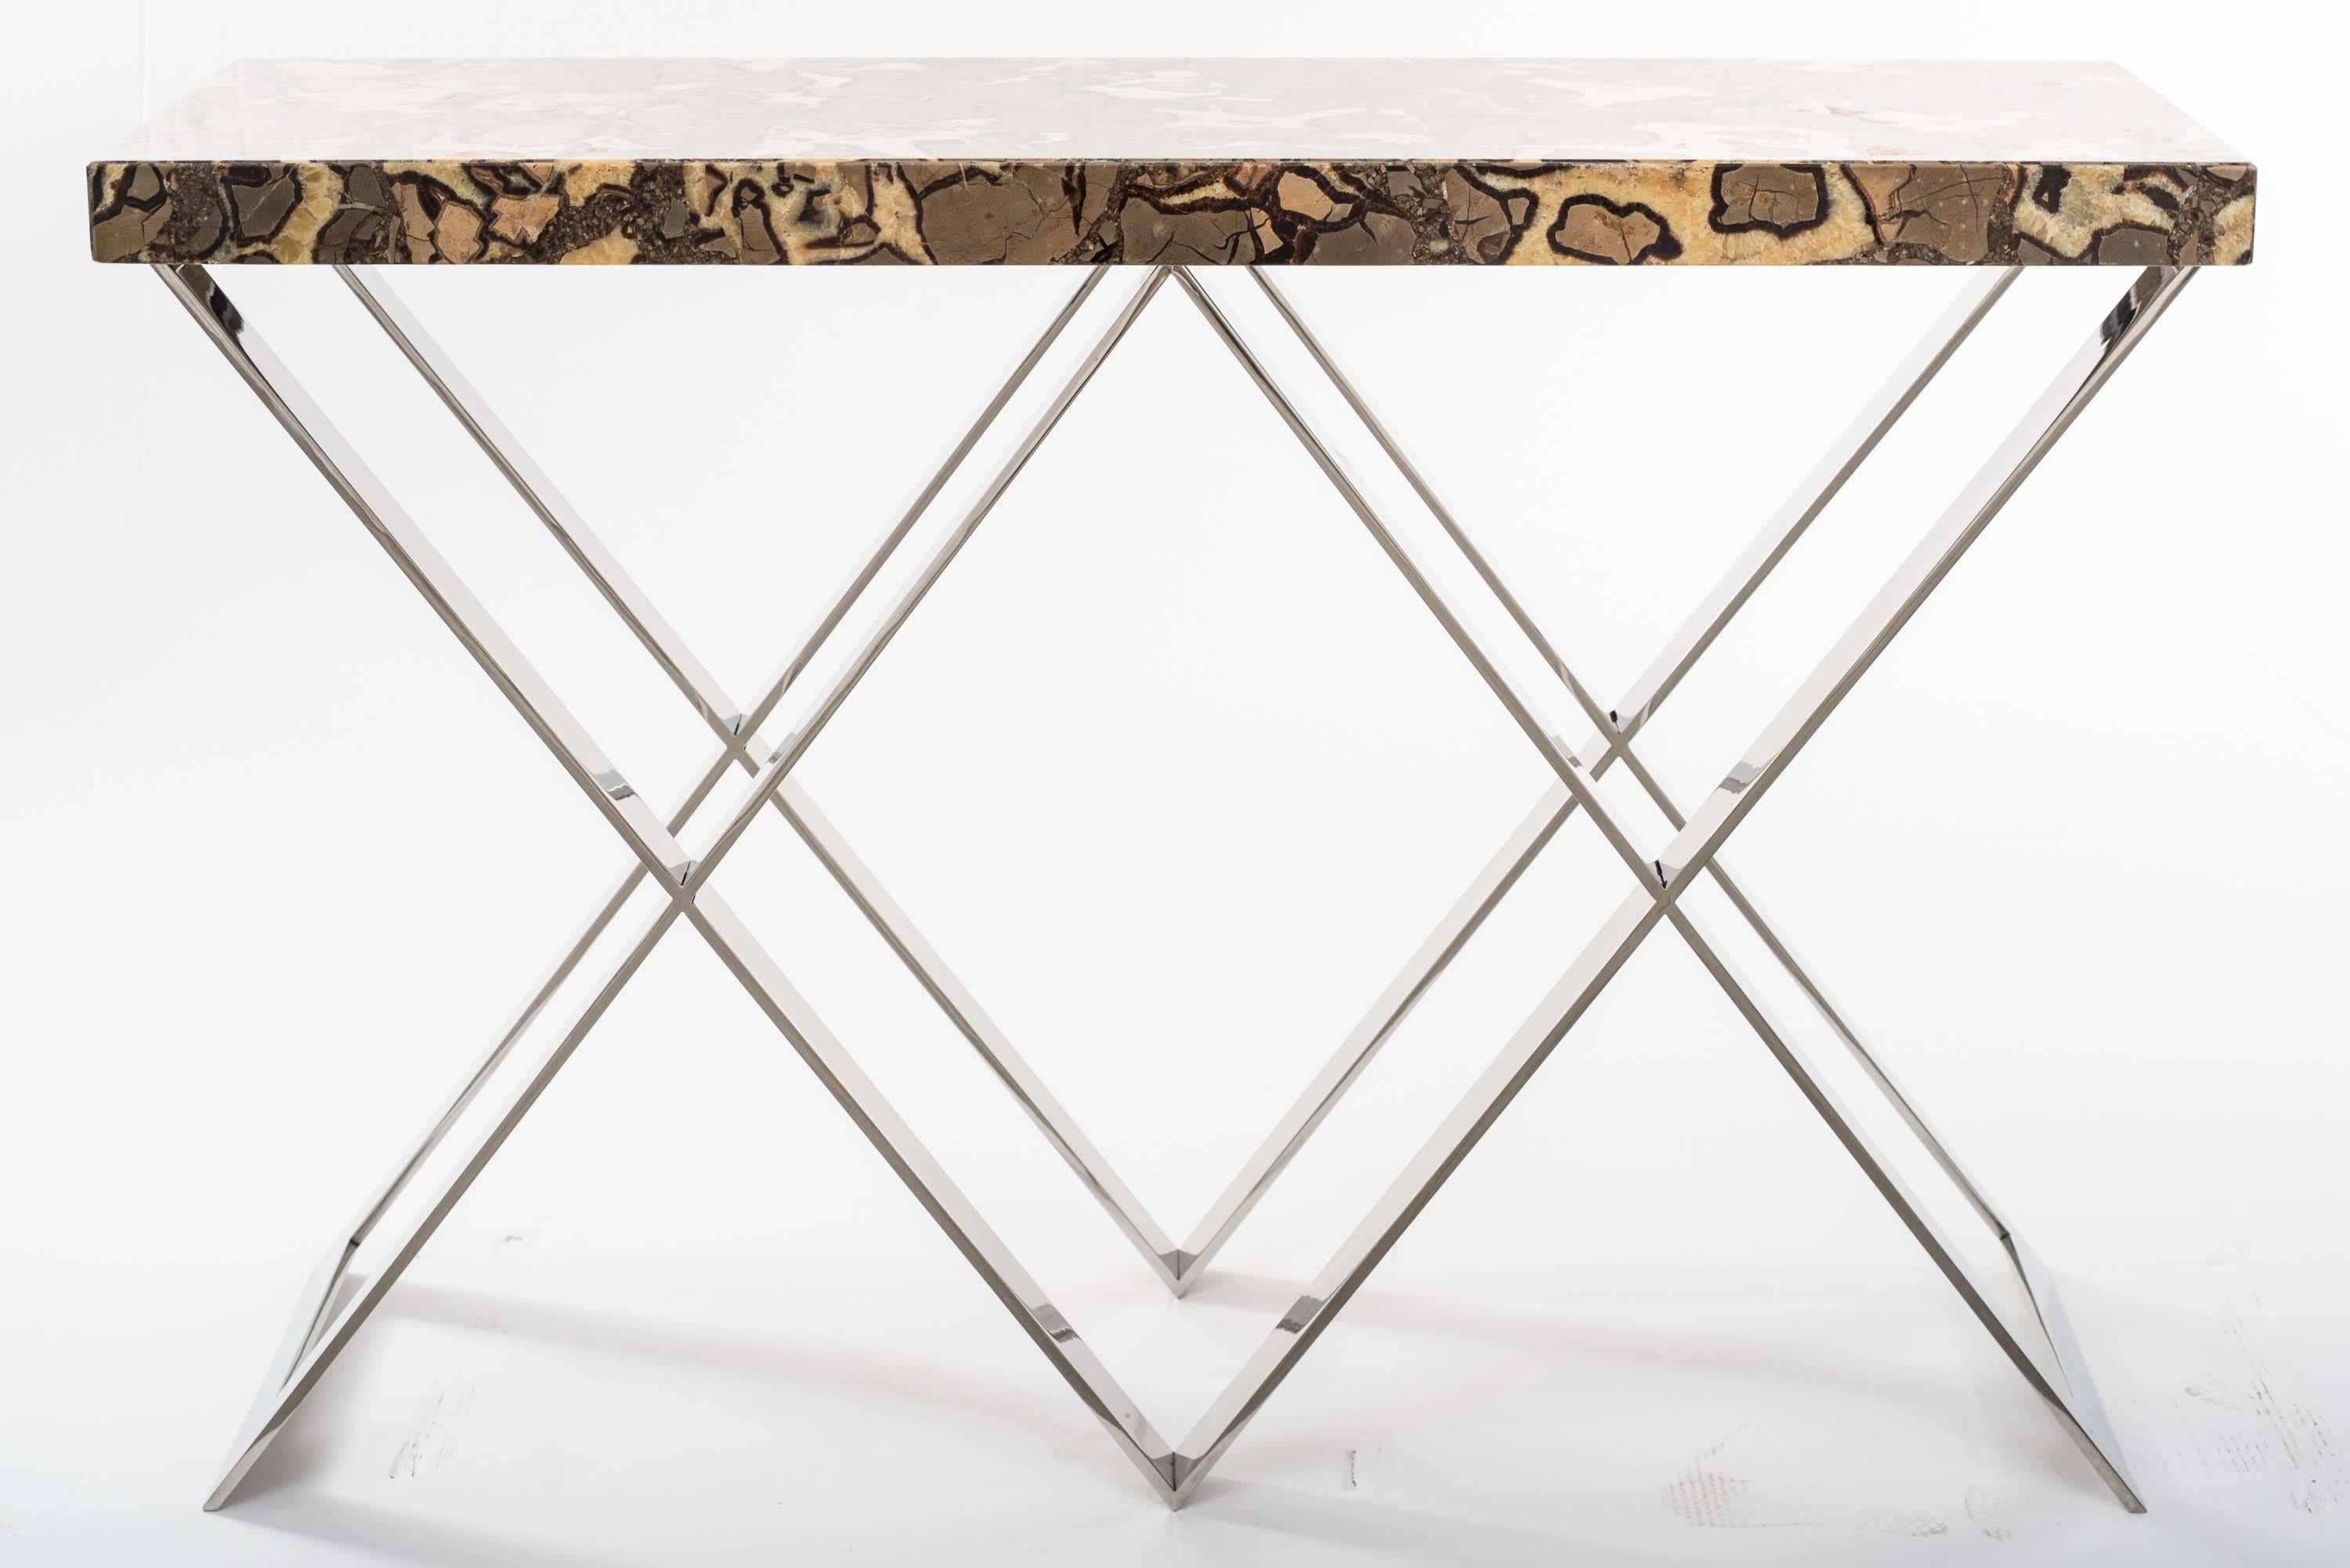 Exceptional console Tables with double X-shaped chrome base .
The marble tops of these pair of consoles are made with a semi-precious stone called “septaria”, which is formed by overlapping mineral deposits and is crossed by crystal streaks. Slabs